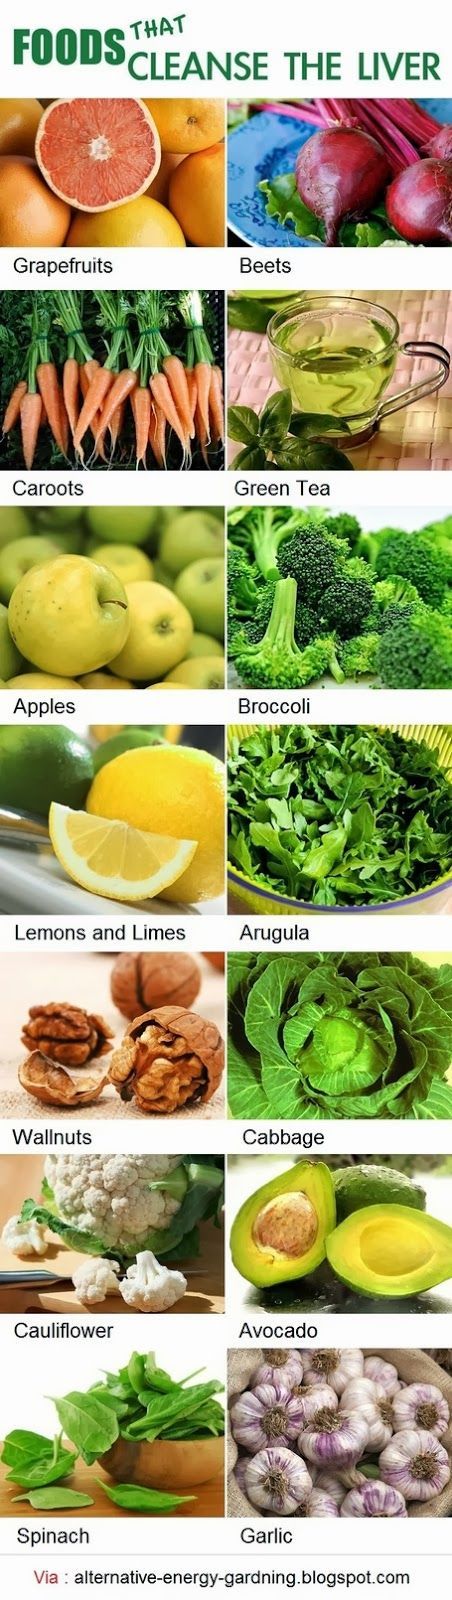 Foods that cleanse your liver.